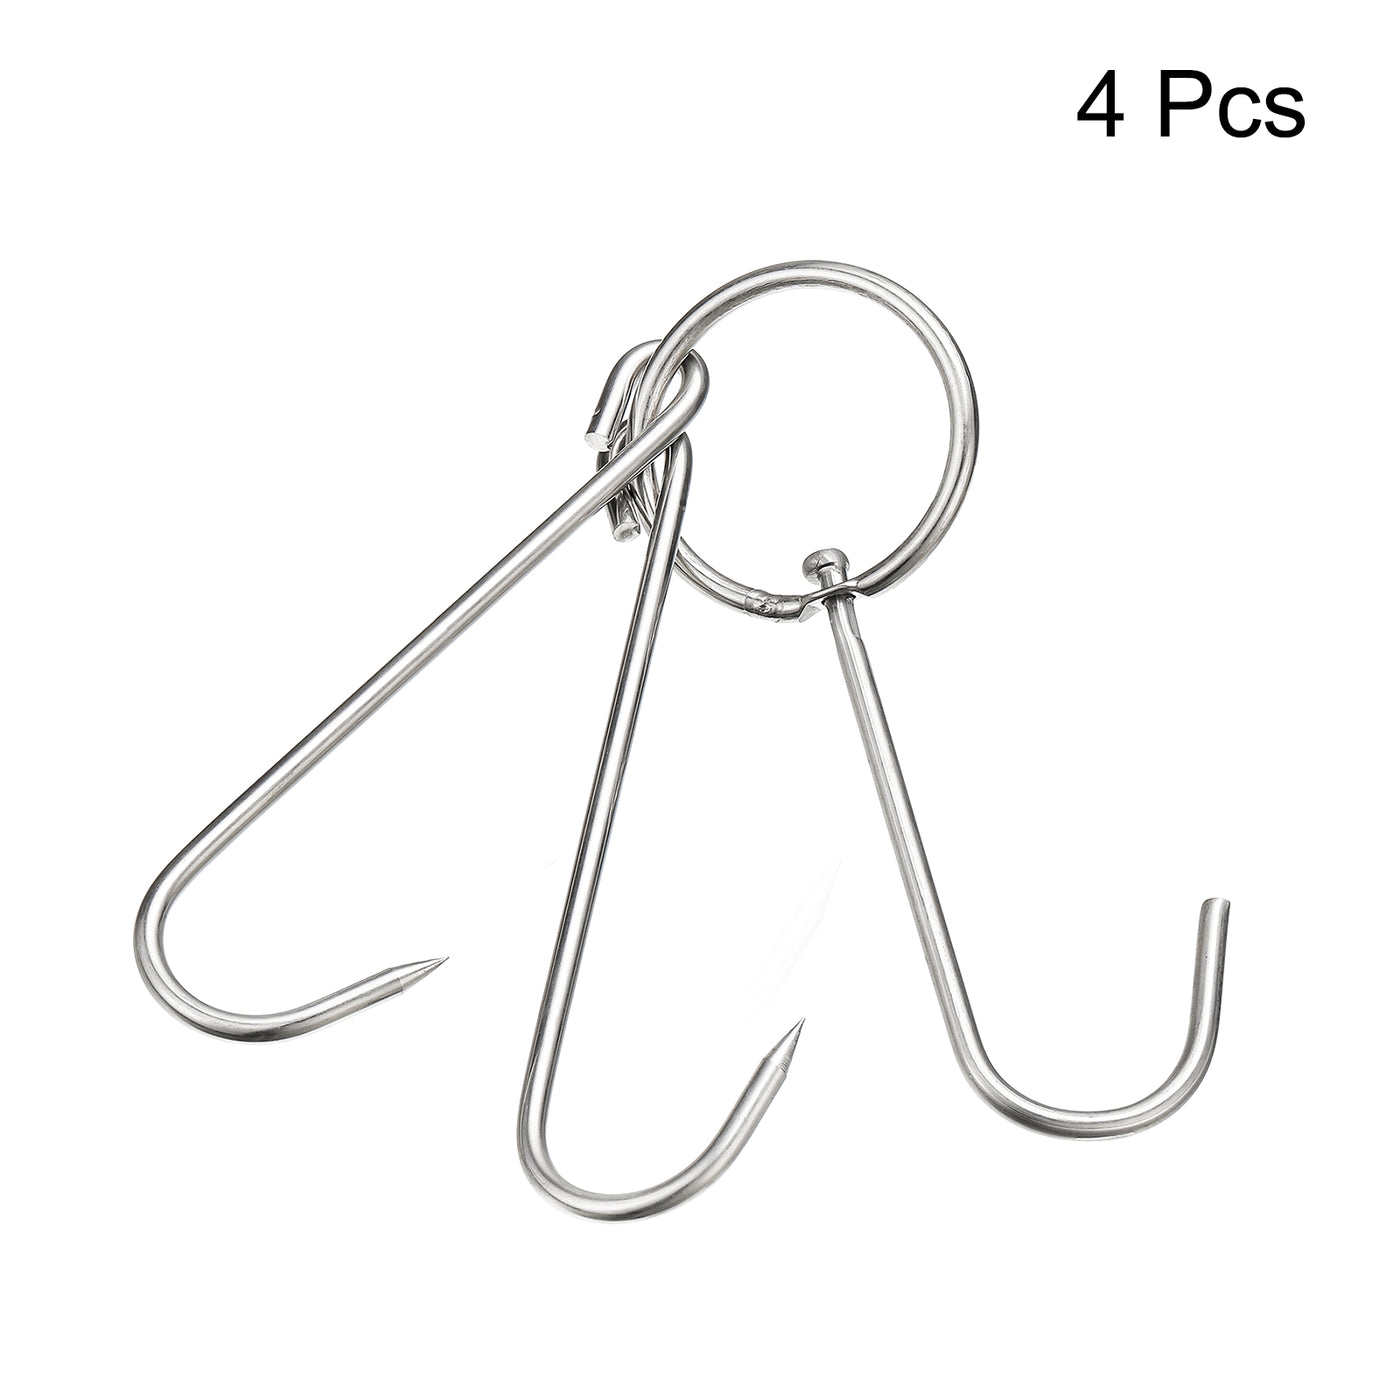 uxcell Uxcell Double Meat Hook, Stainless Steel Smoker Hook Tools for Grill Cooking Fish Chicken